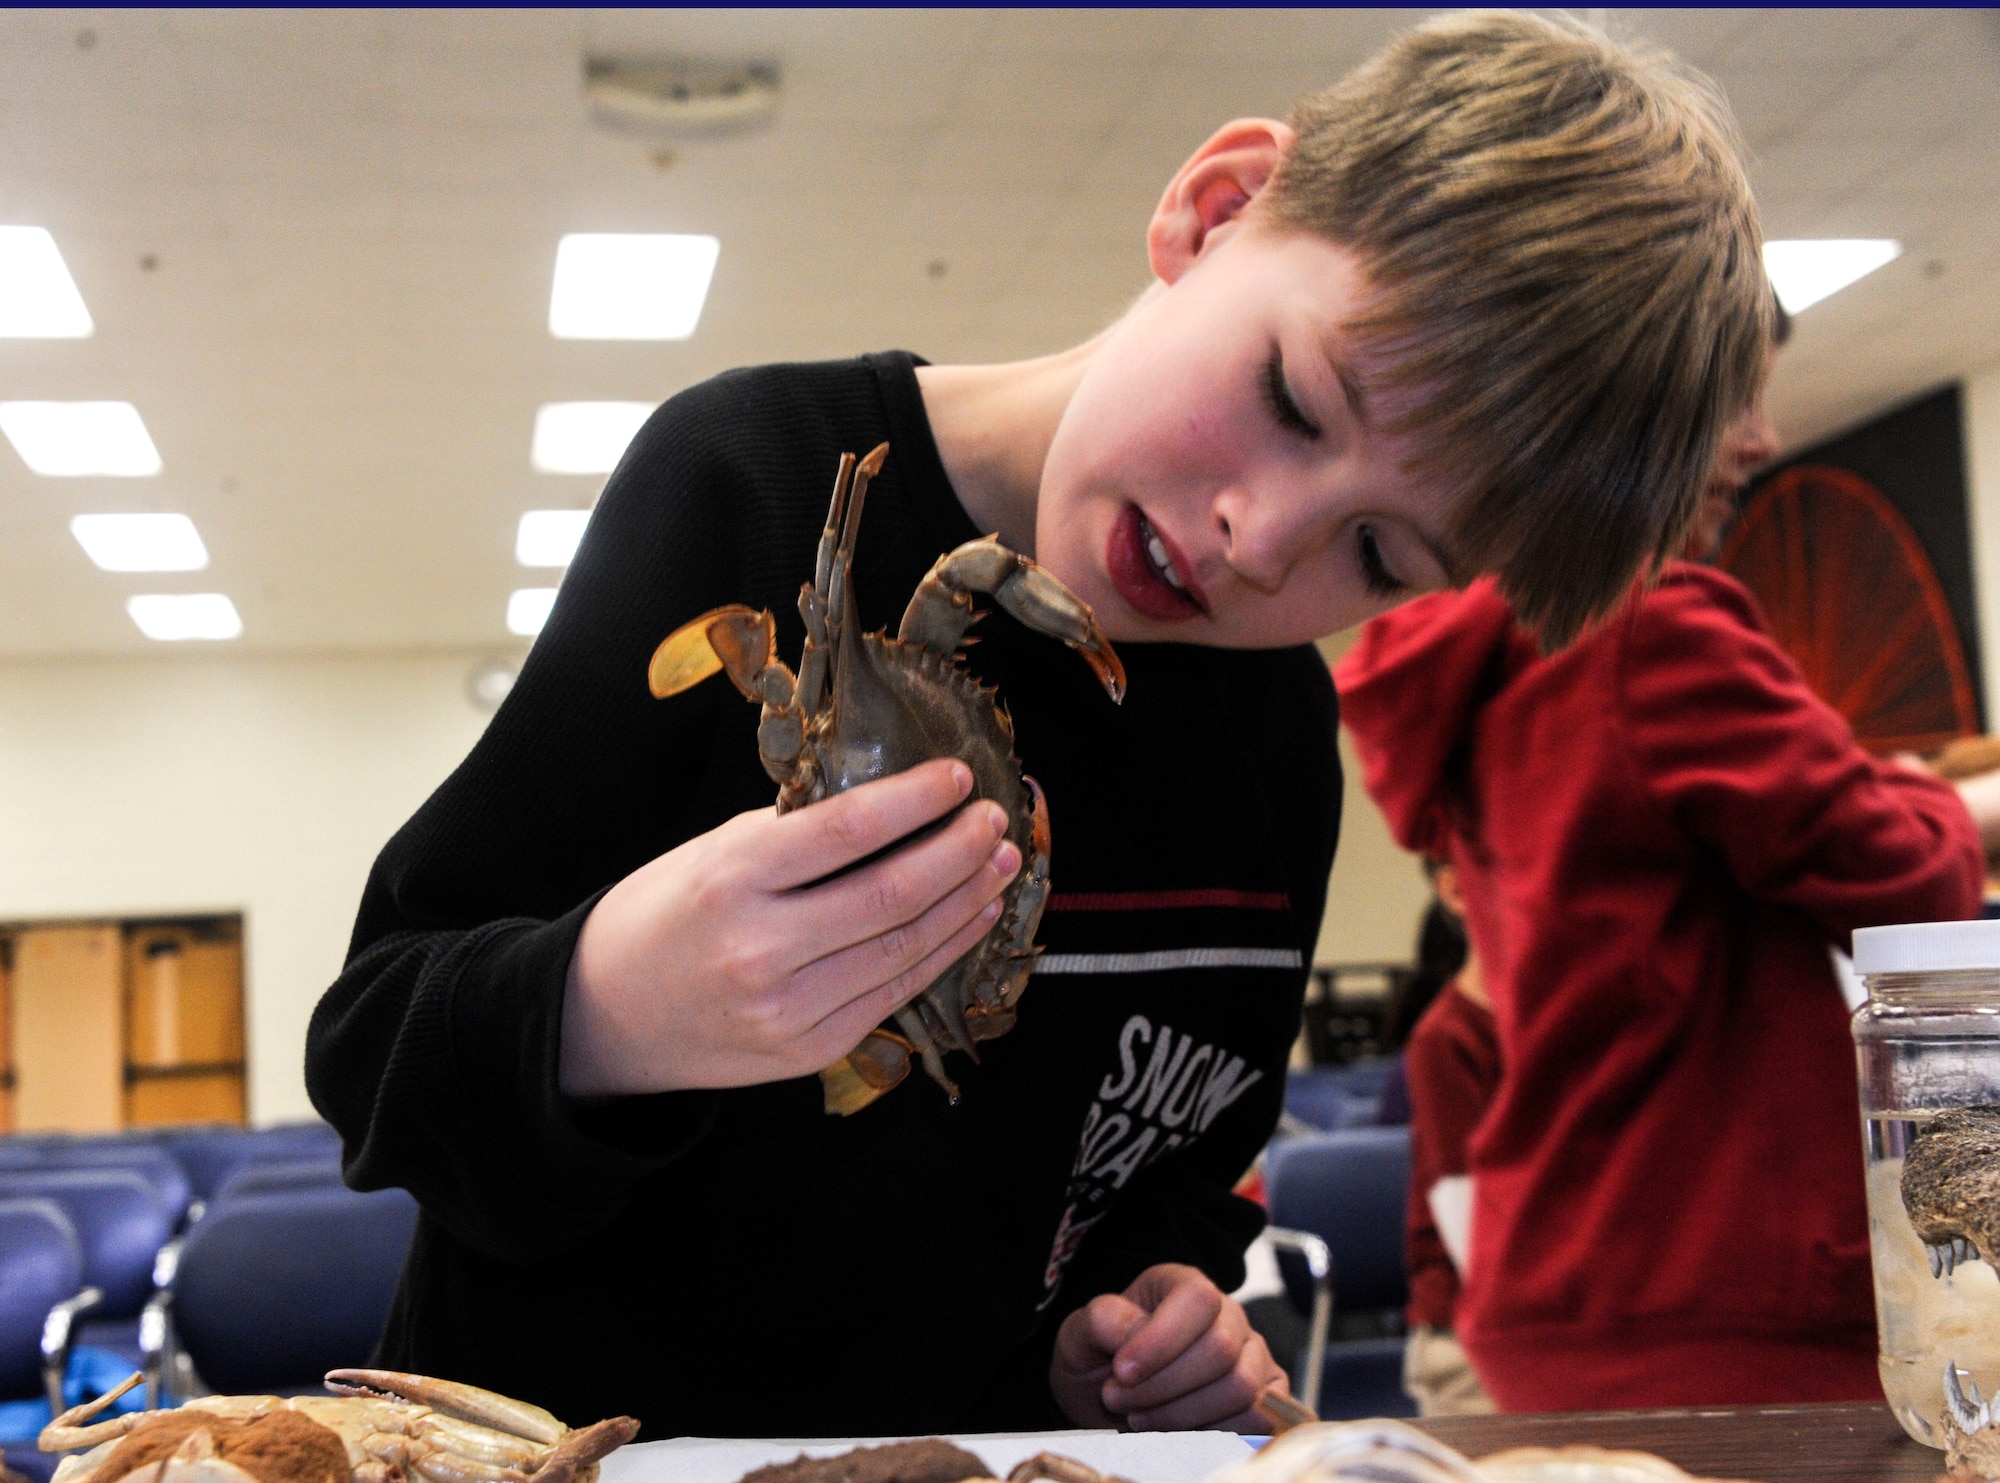 Aidan Christensen, Maxwell Elementary/Middle School second grader, examines a preserved blue crab during the Dauphin Island Sea Lab’s BayMobile event Jan. 26, 2015, at the Maxwell Elementary/Middle School, Maxwell Air Force Base, Alabama. The blue crab is native to the waters of western Atlantic Ocean and the Gulf of Mexico. (U.S. Air Force photo by Airman 1st Class Alexa Culbert)